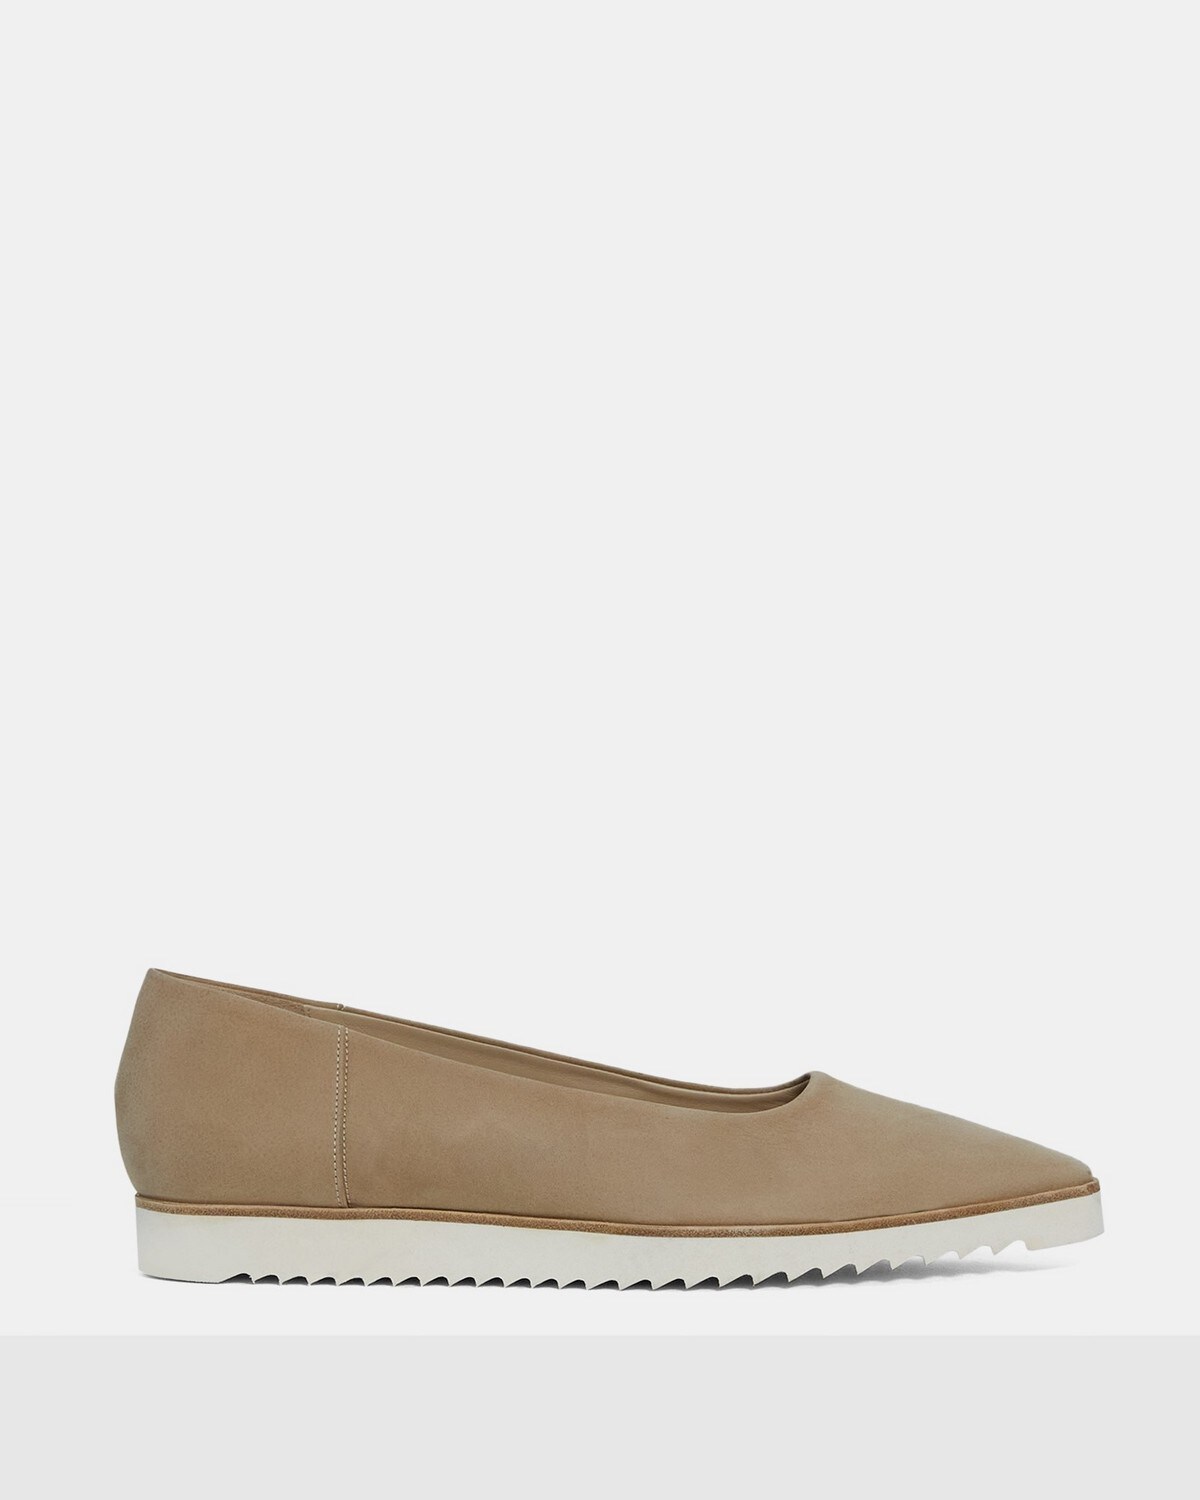 Theory Sport Flat in Leather